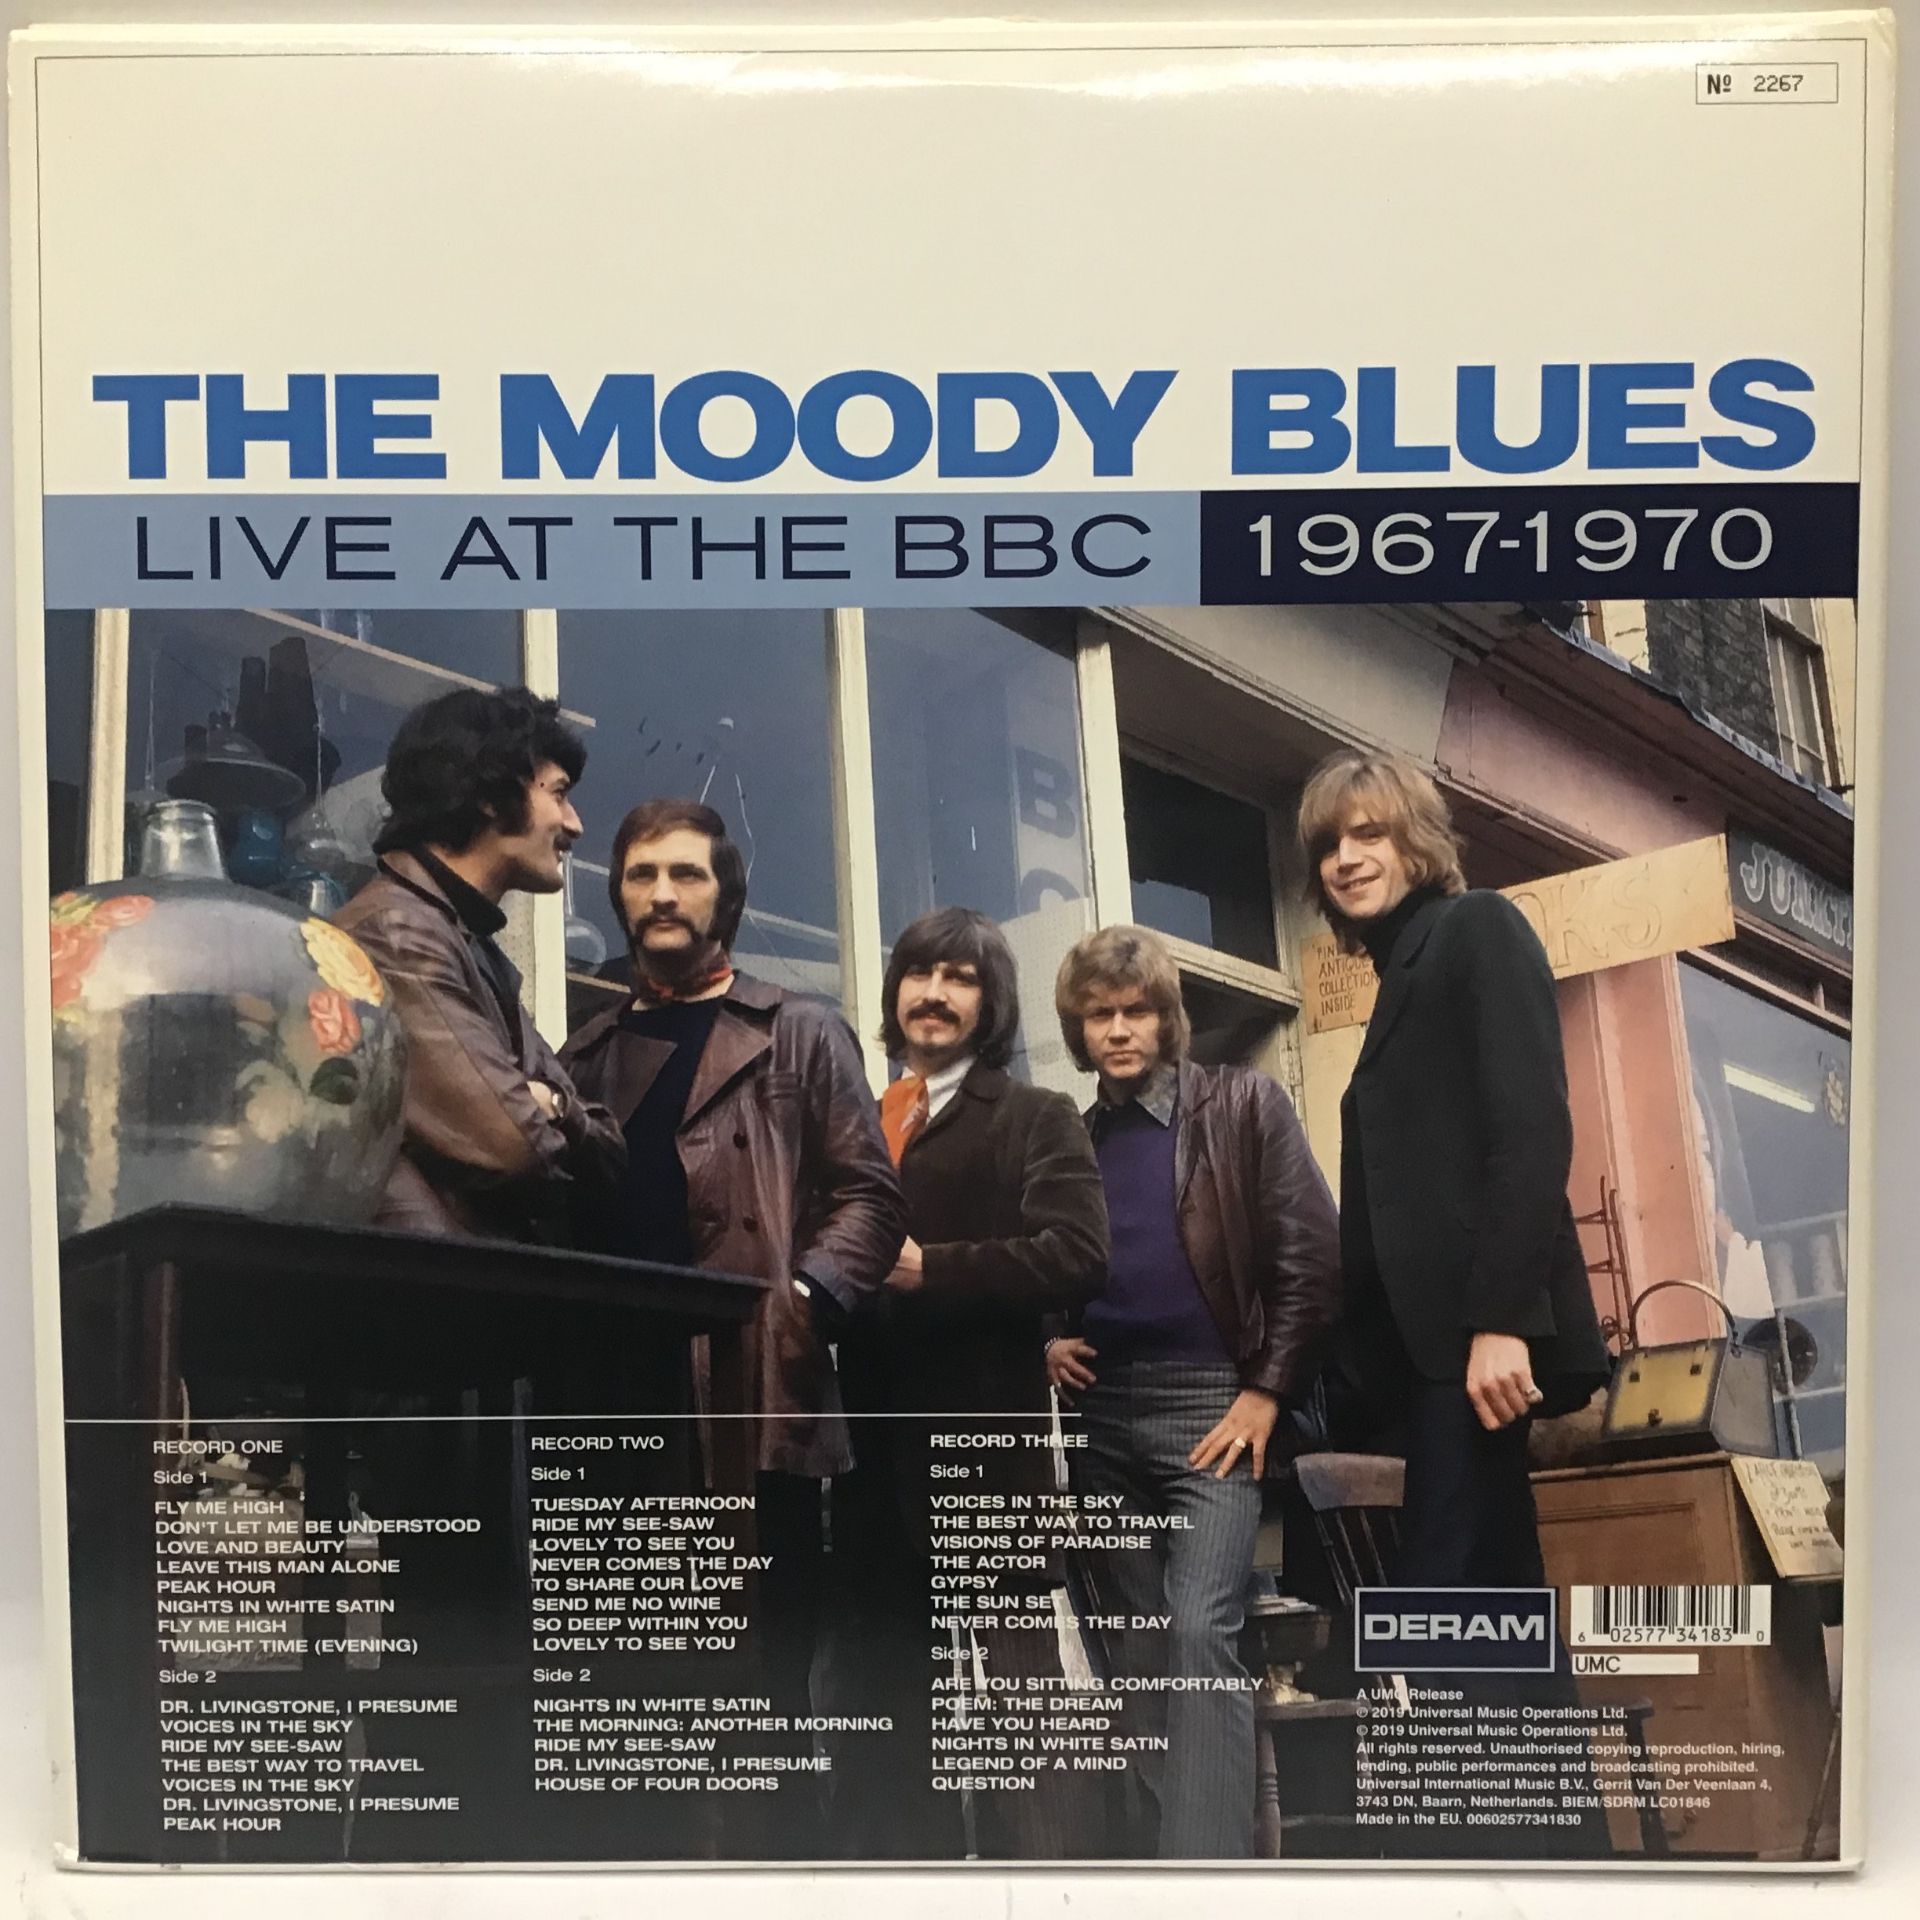 THE MOODY BLUES 'LIVE AT THE BBC' VINYL ALBUM. This 3 record set comes pressed on 2 x blue colored - Image 2 of 4